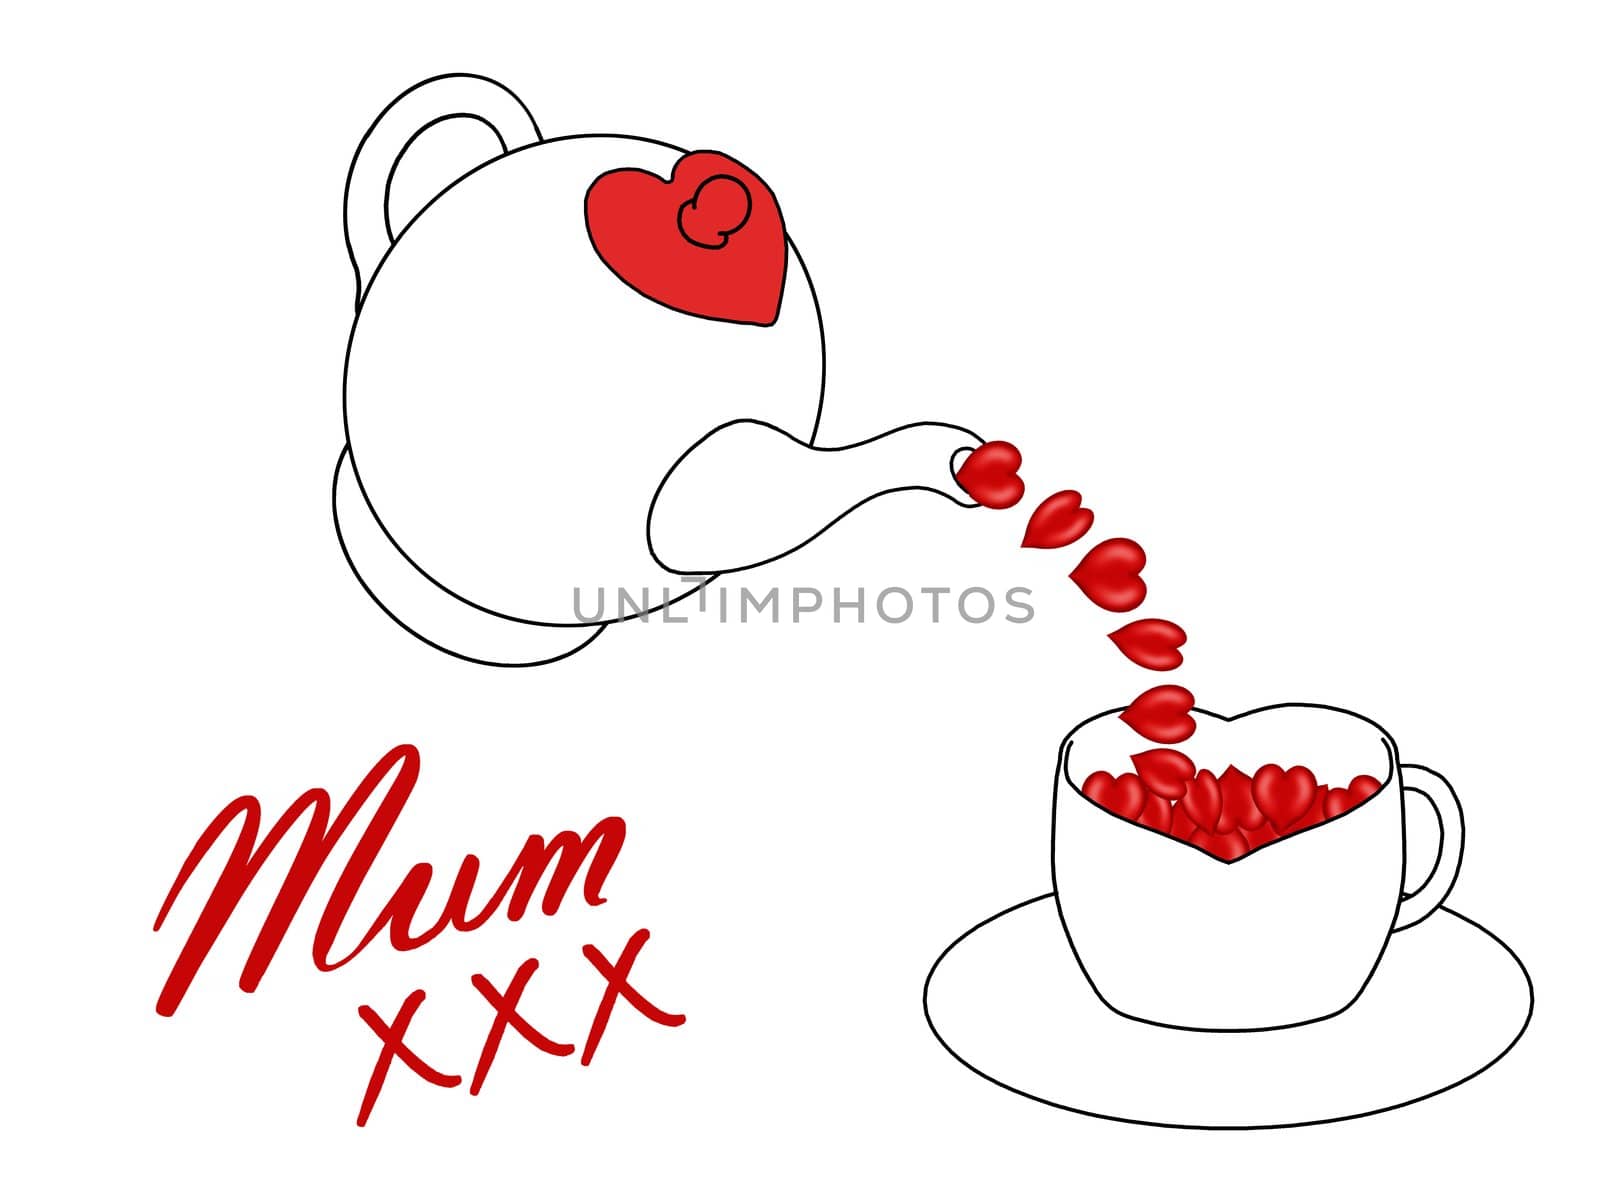 Mum xxx, Teapot pouring red hearts into a teacup isolated on a white background